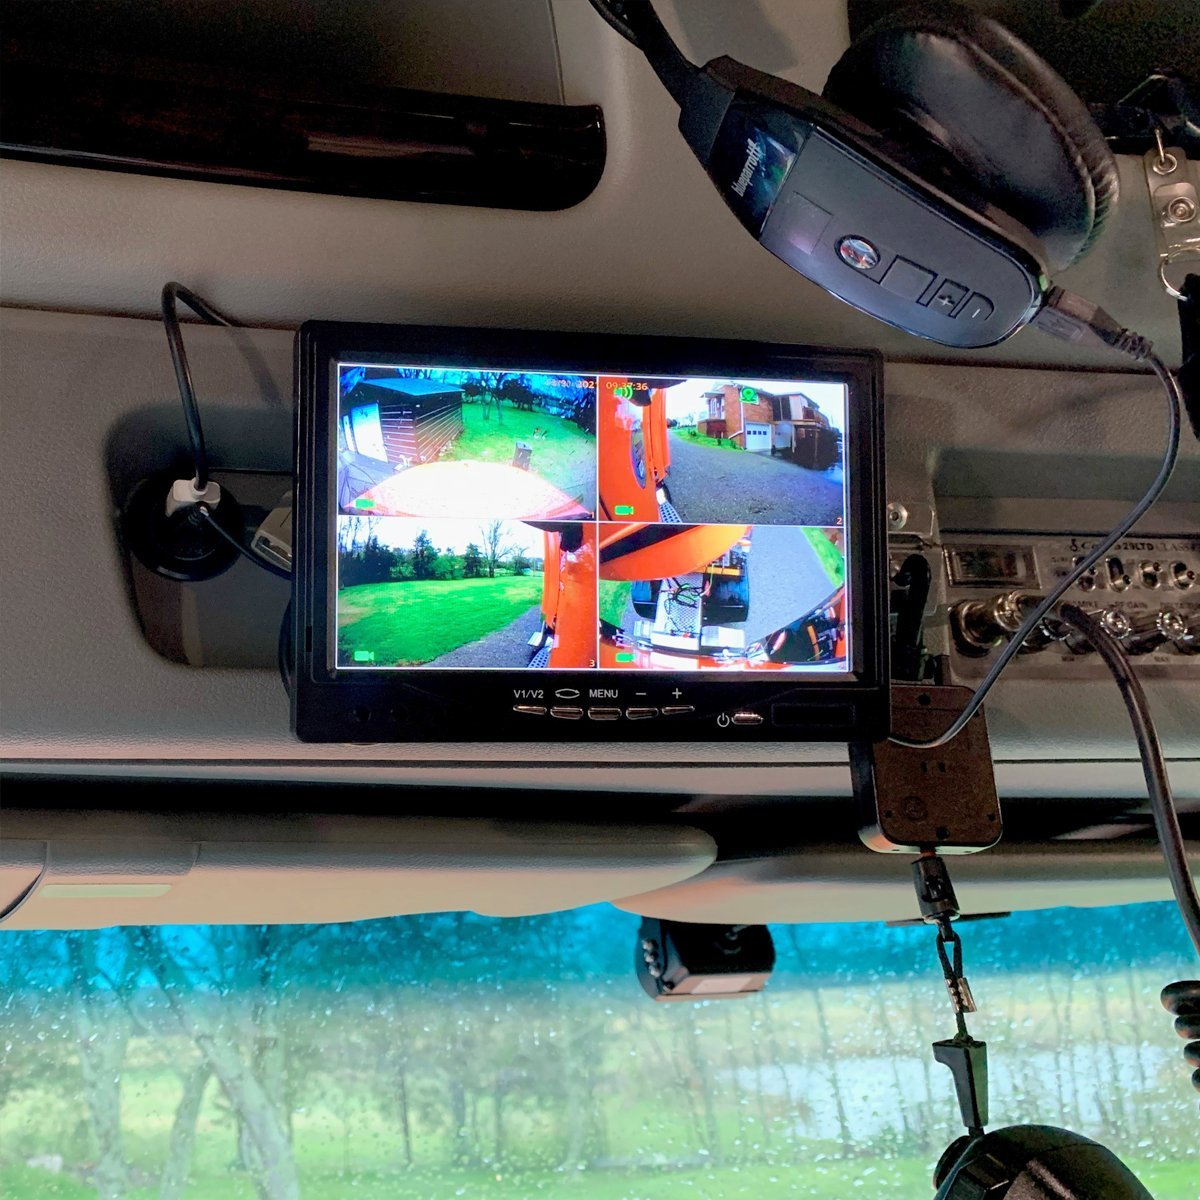 Agri-Farming WIRED DVR Camera System with 10" LCD Up to 4 Cameras